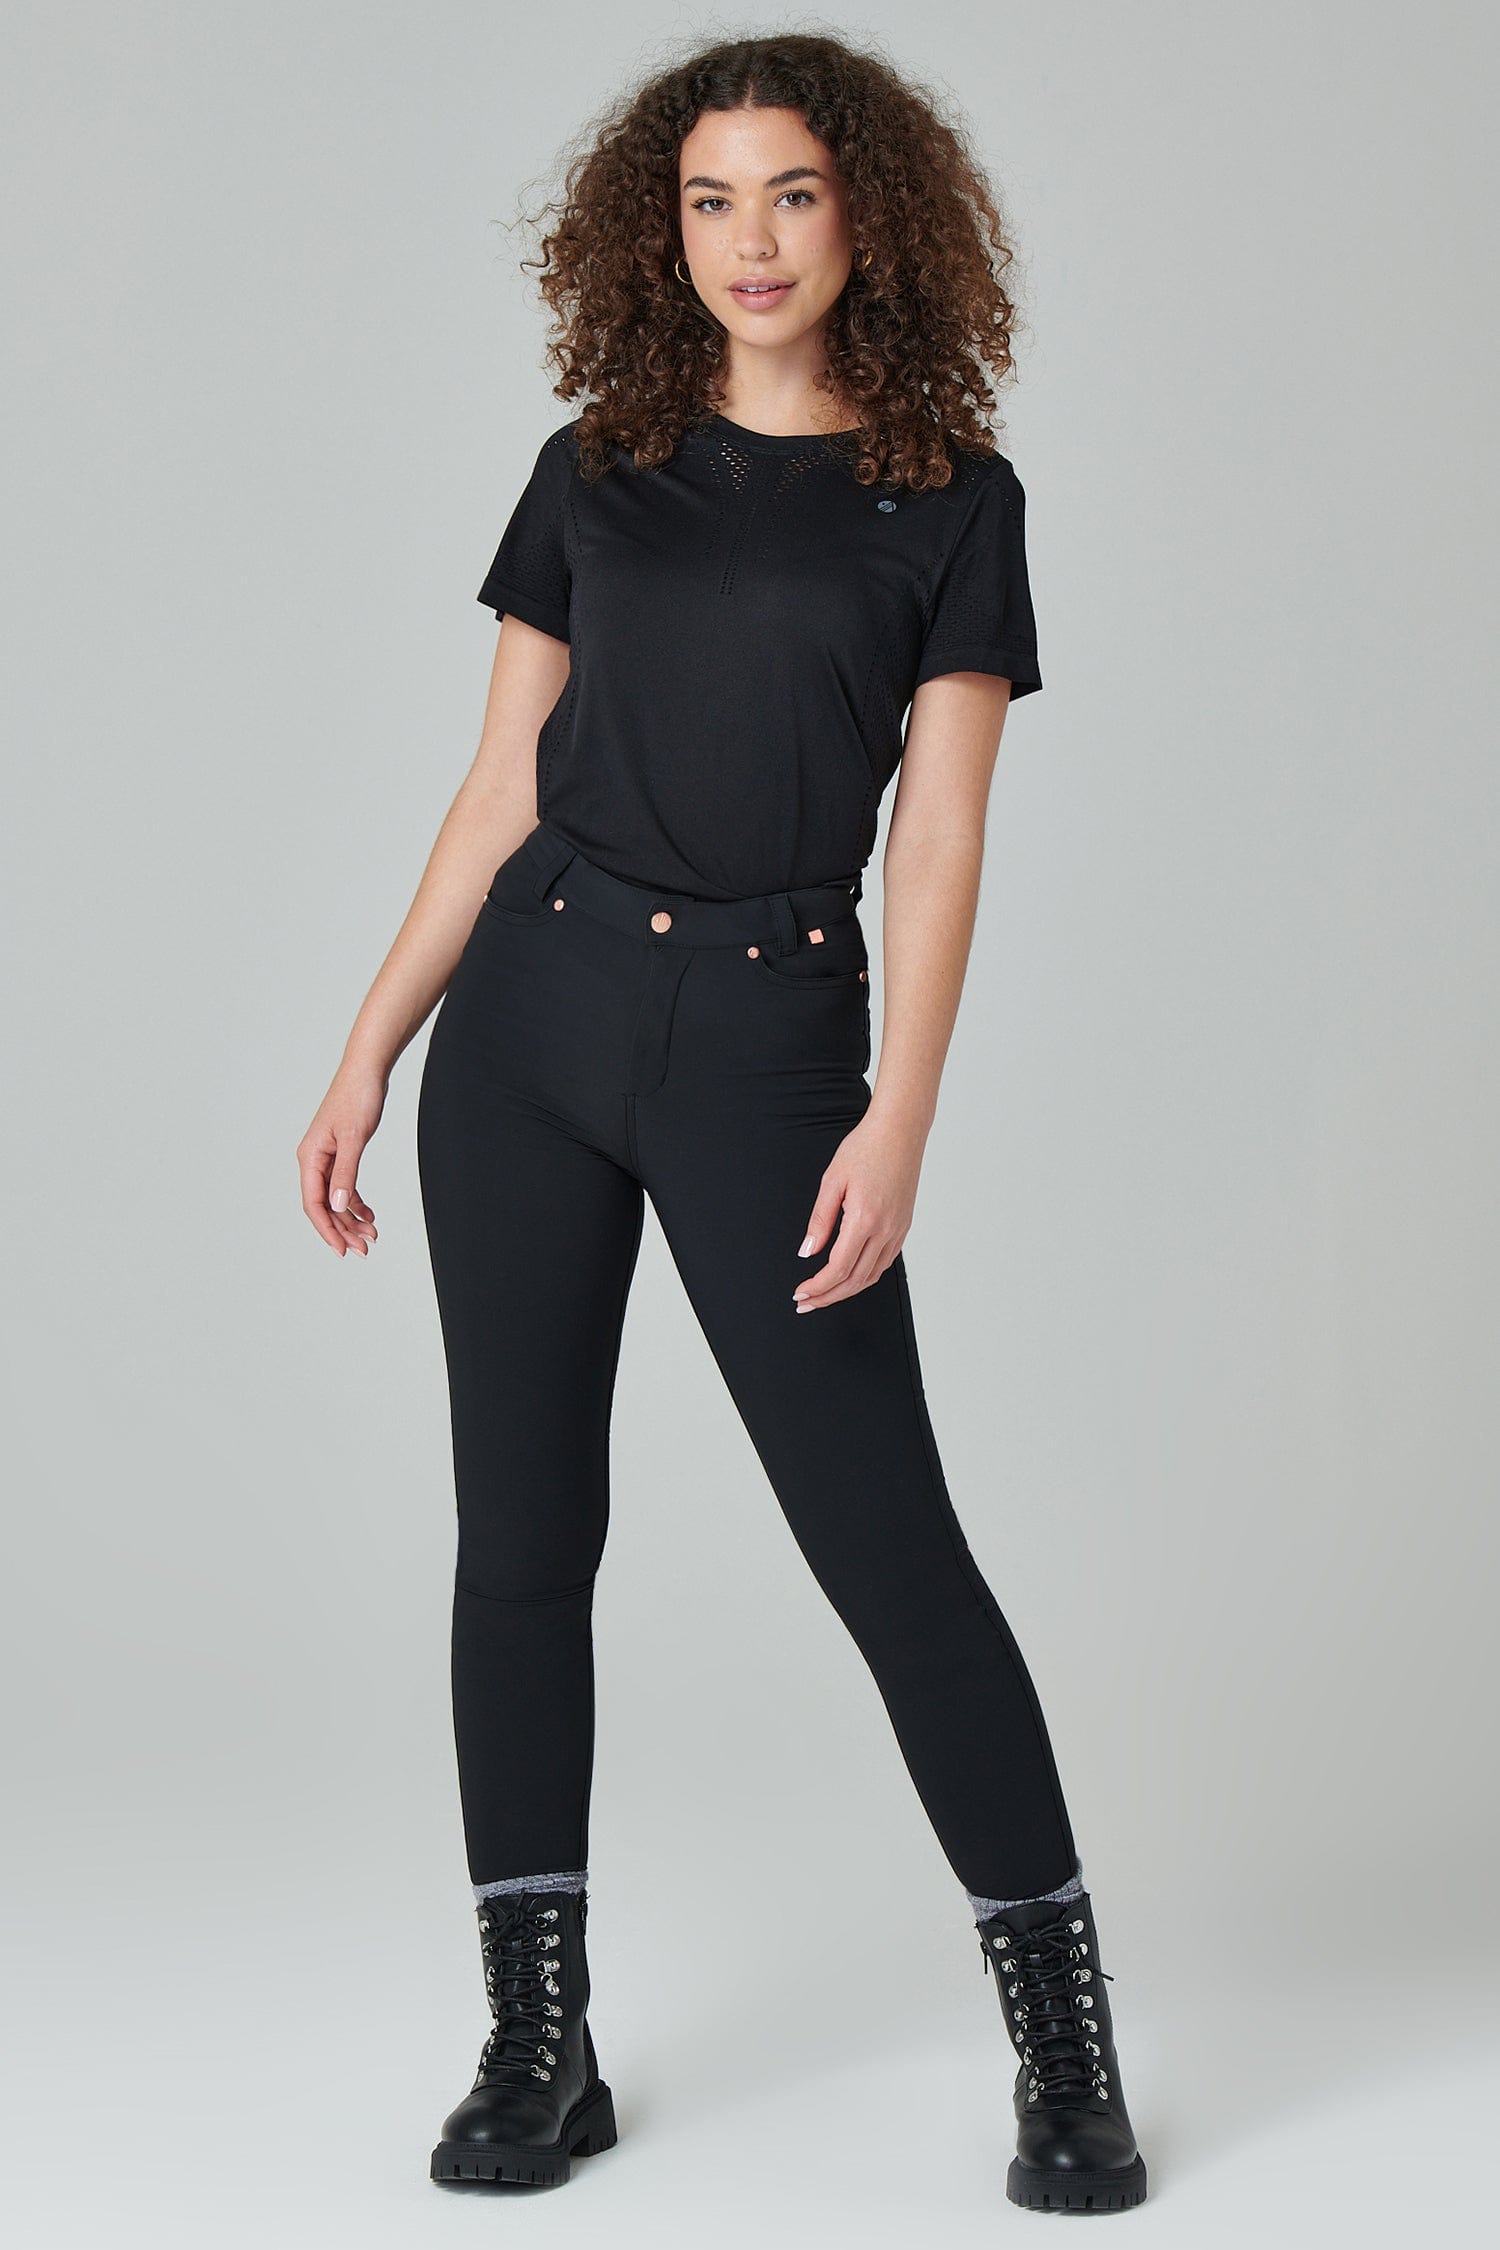 MAX Stretch Skinny Outdoor Trousers - Black Trousers  